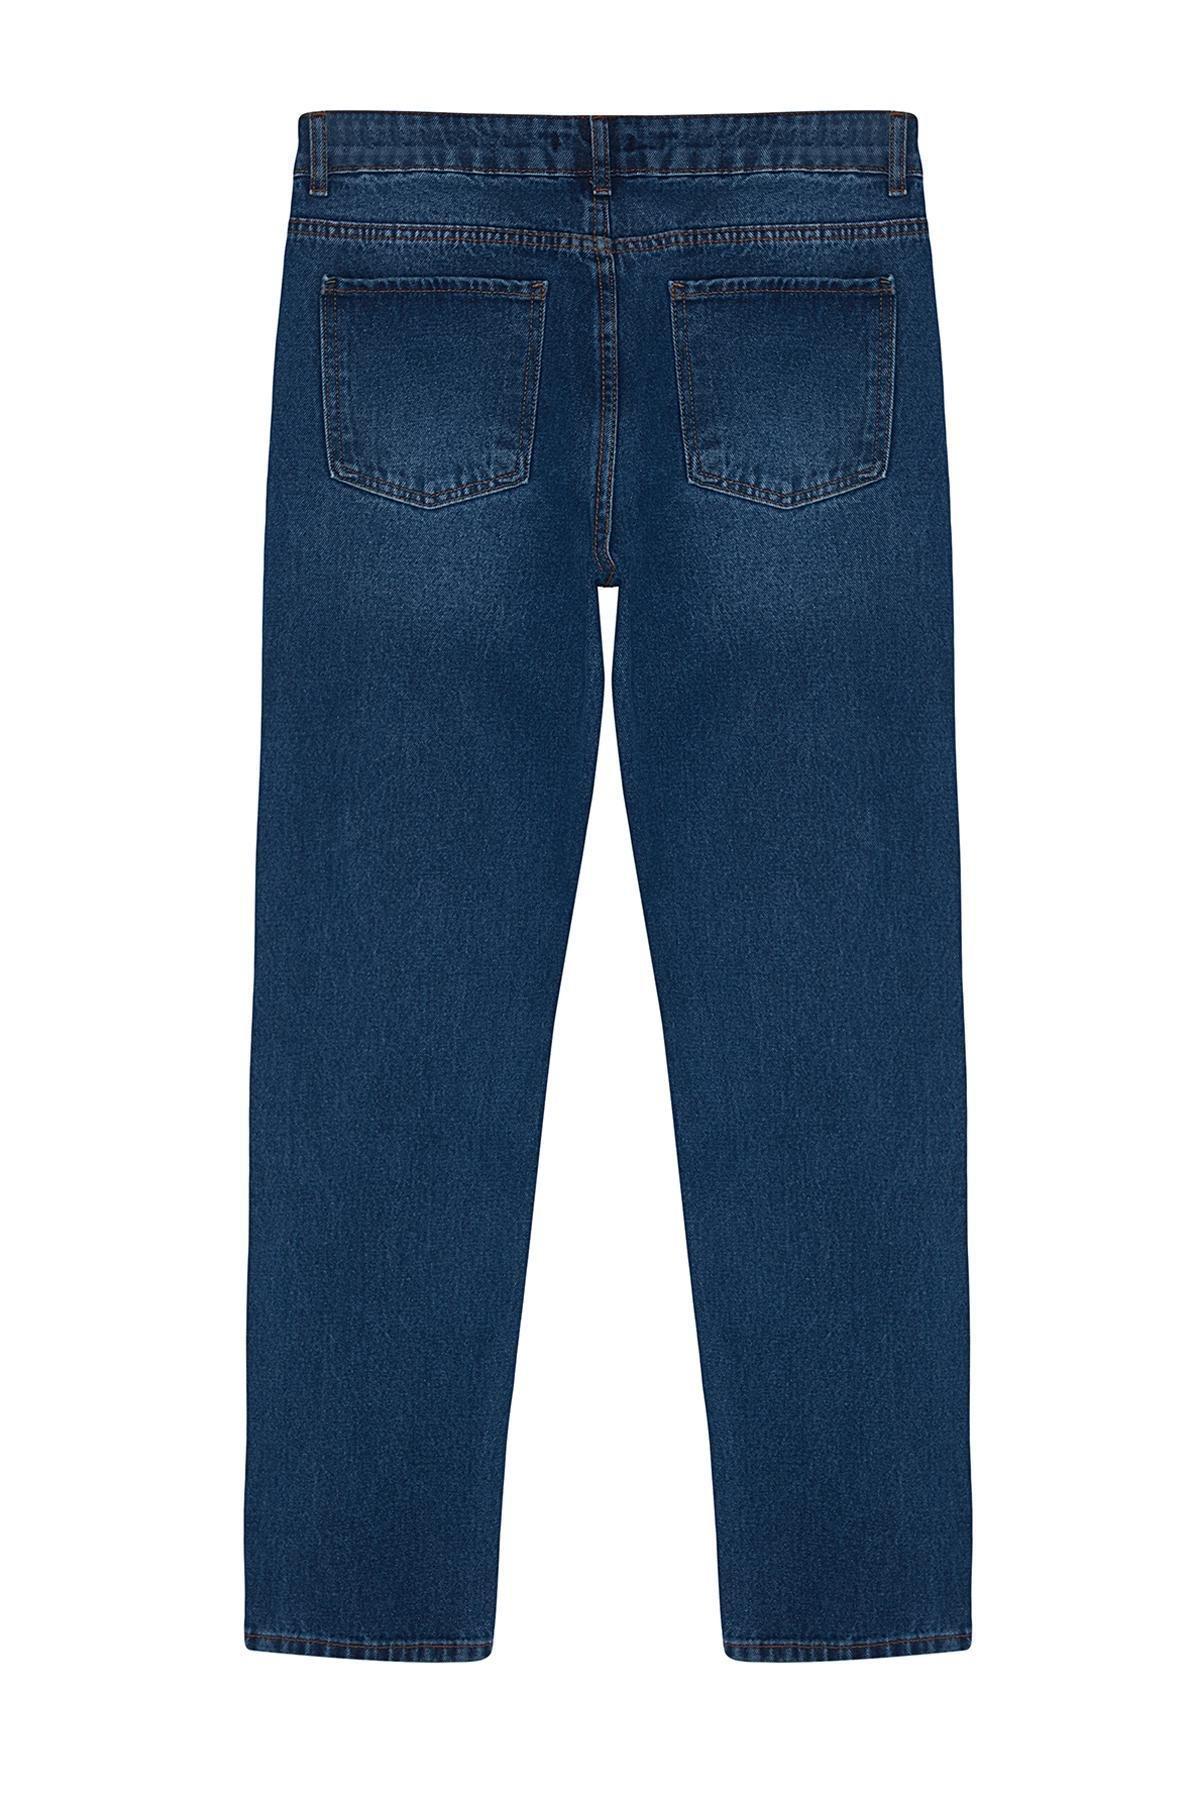 Trendyol - Blue Straight Fit Jeans <br>